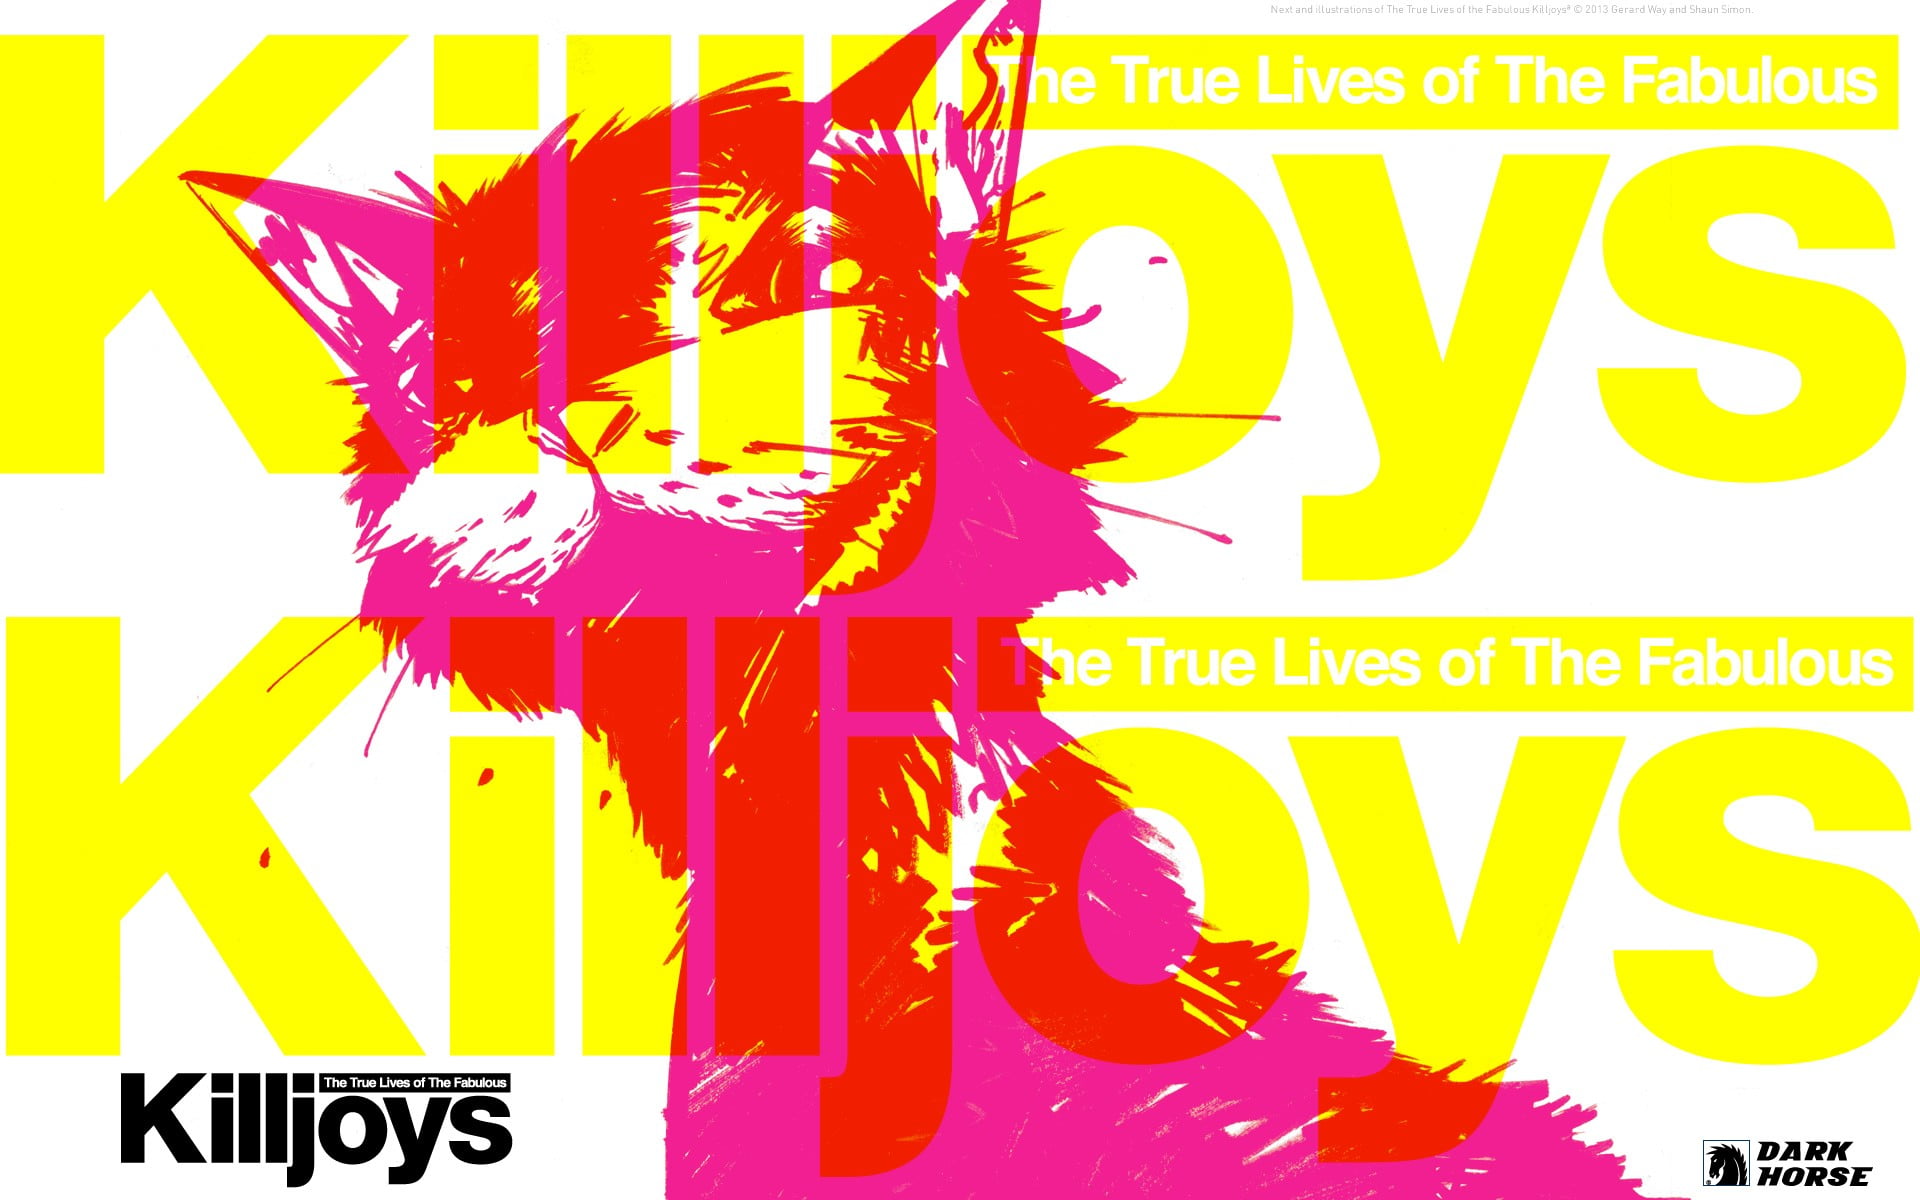 yellow and red Killjoys illustration, The True Lives of The Fabulous Killjoys, Danger Days, My Chemical Romance, Better Living industries